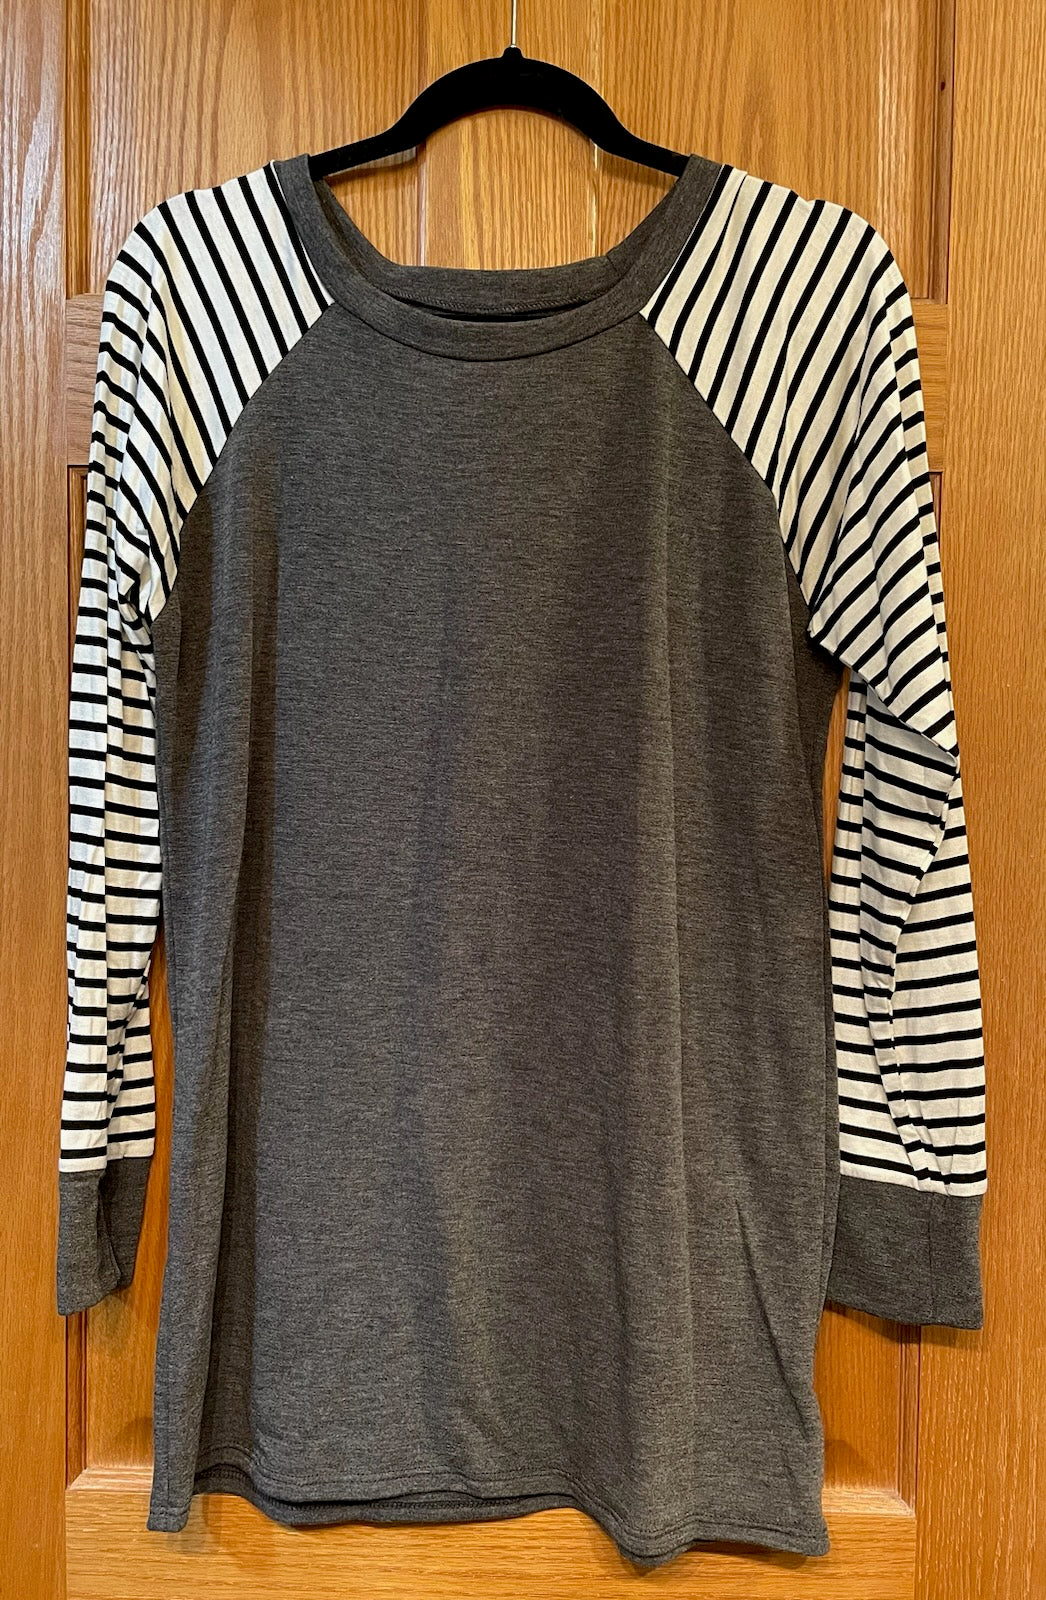 Solid Tunic top with Stripe Sleeves